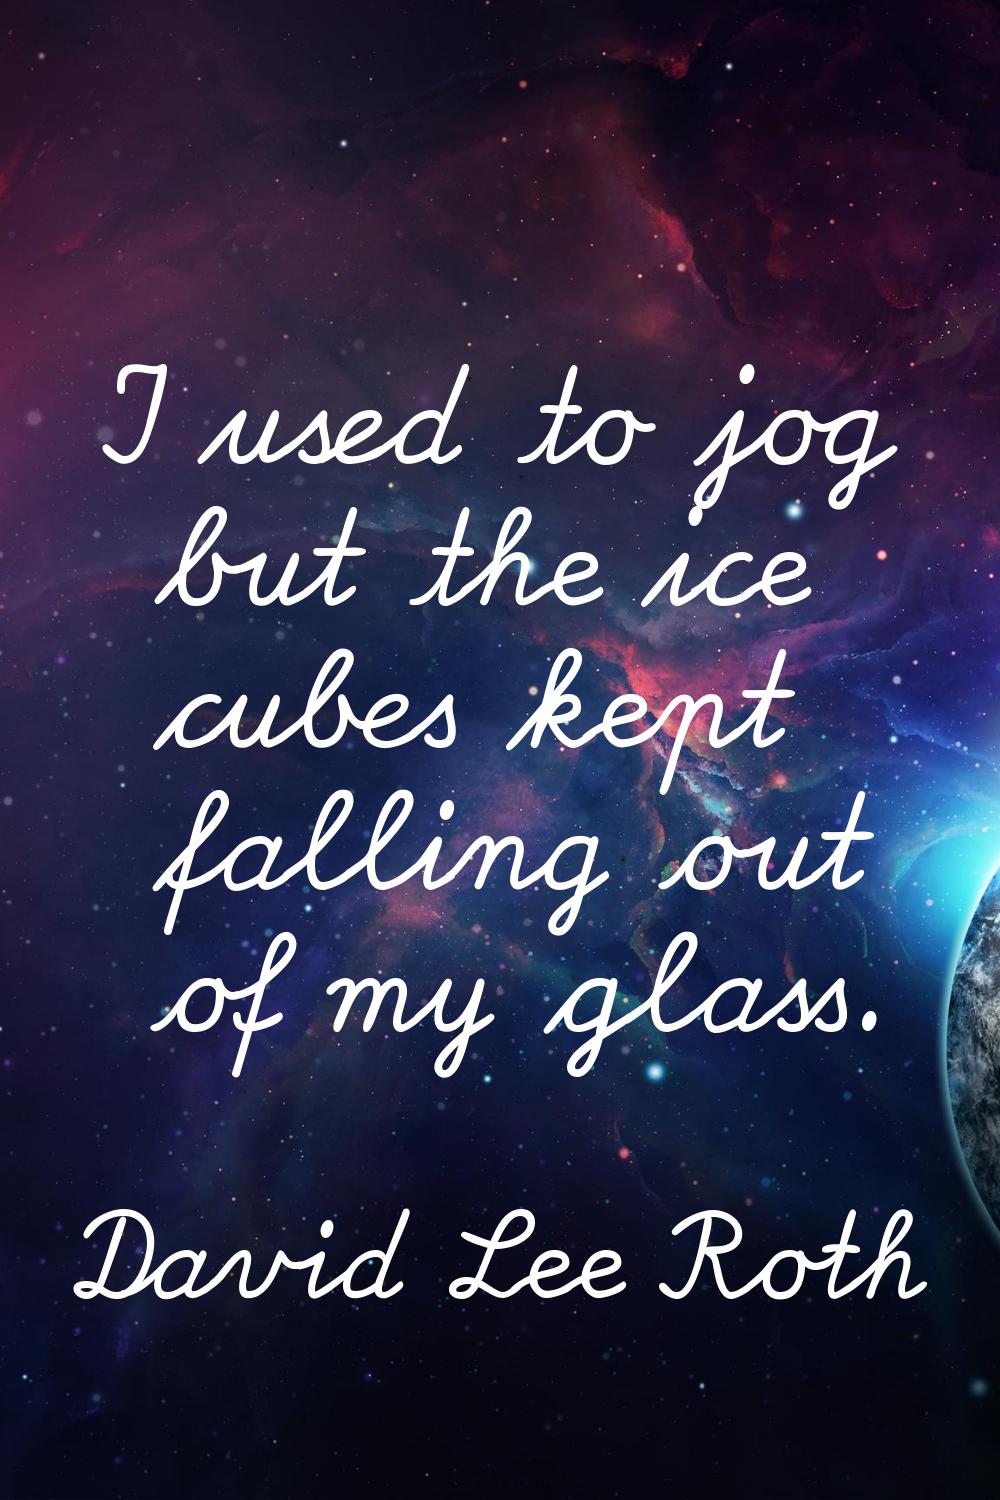 I used to jog but the ice cubes kept falling out of my glass.